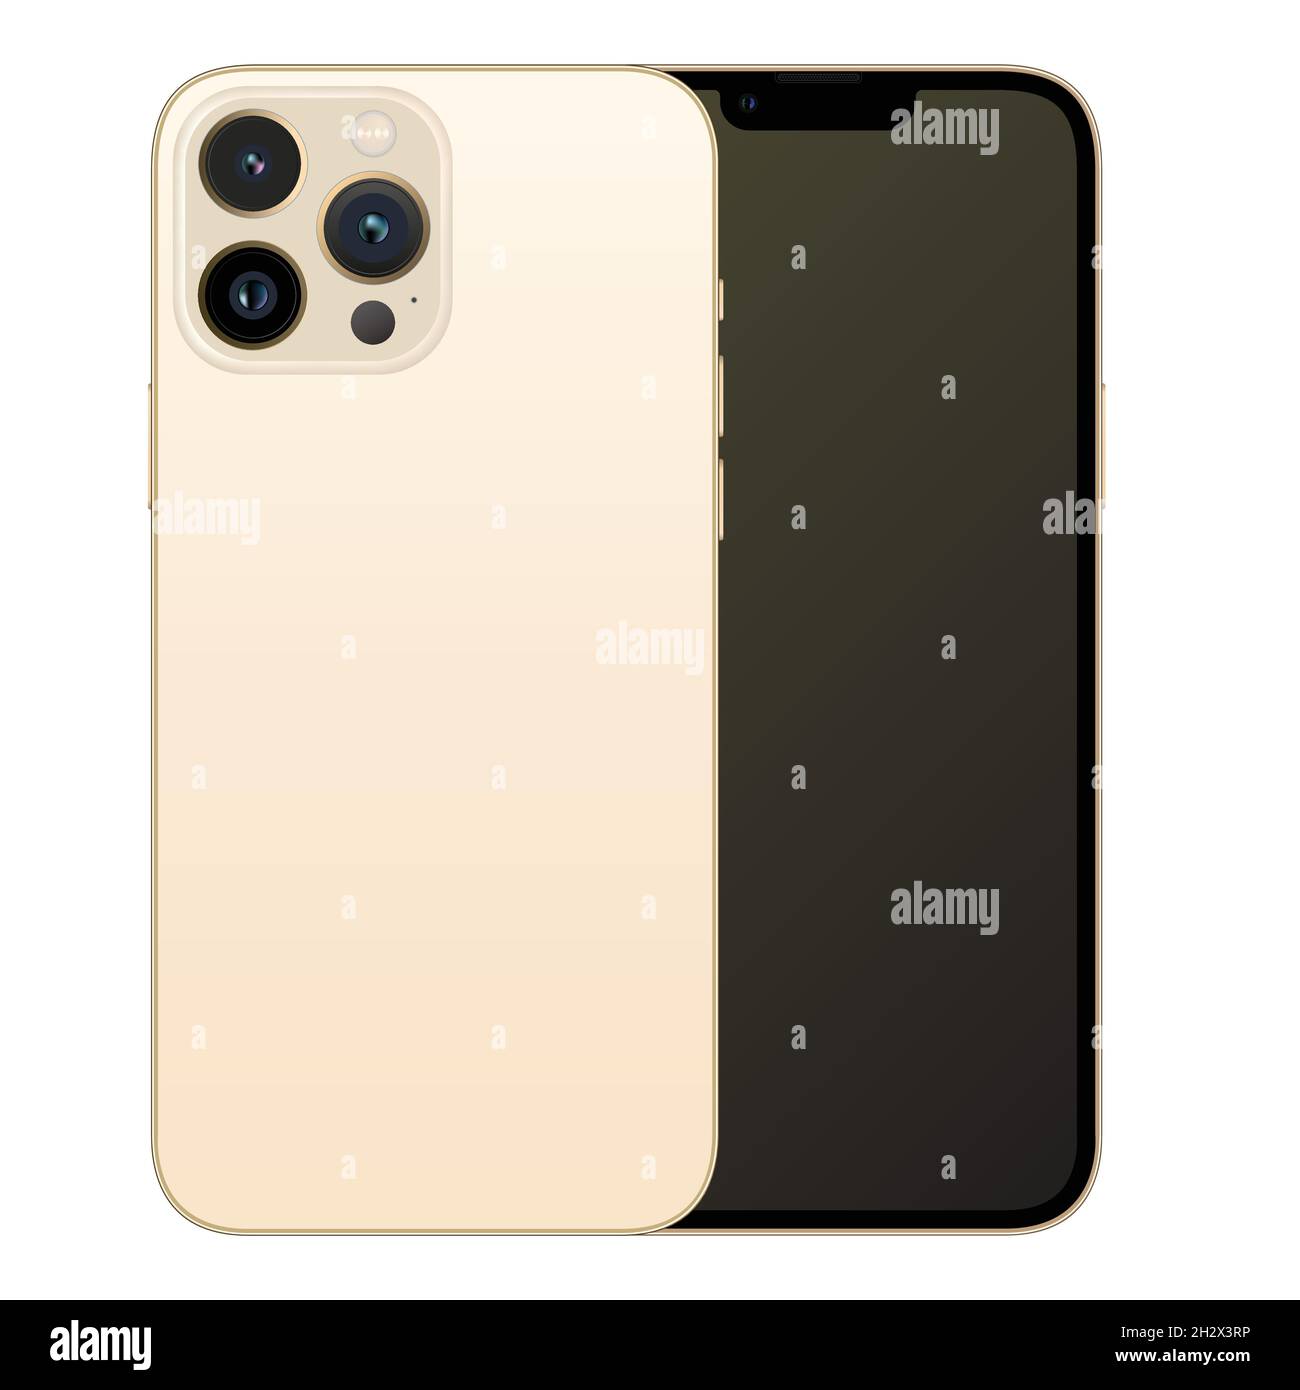 New model iphone 13 pro max gold, front and back design smartphone, flat design mobile phone vector stock illustration Stock Vector